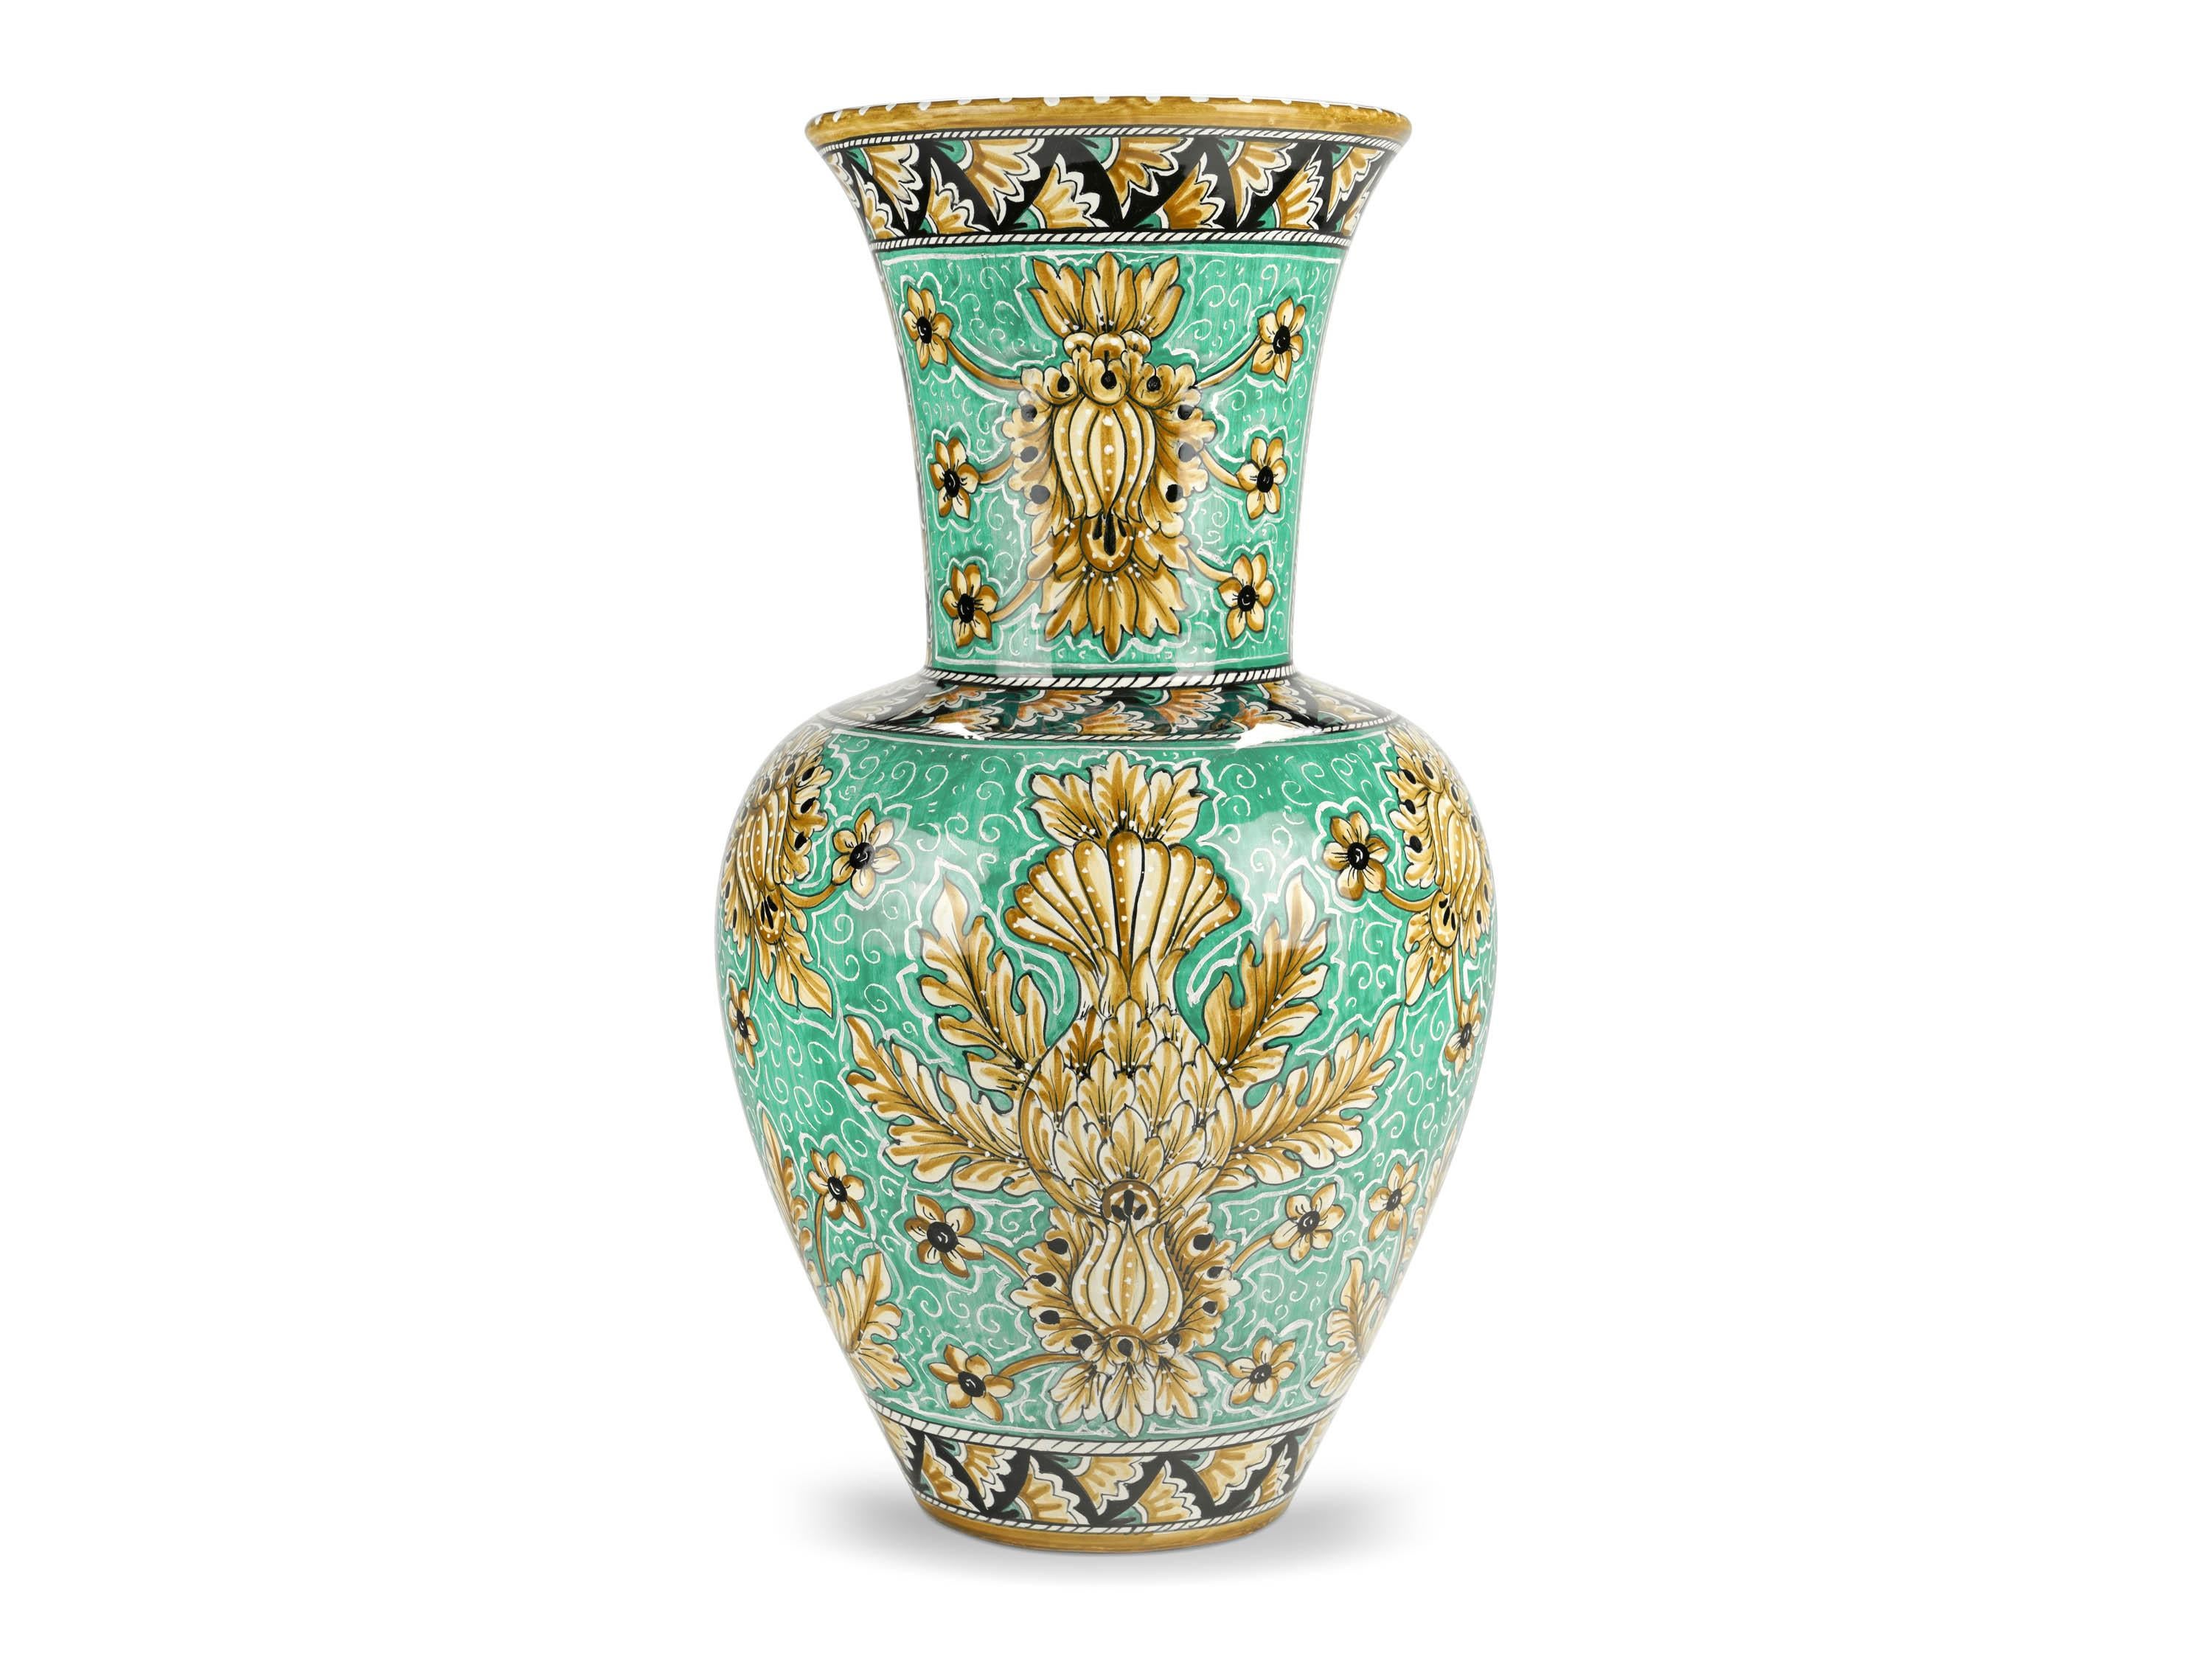 Large majolic vase in green aquamarine color, glazed in polychrome, characterized by the elegant presence of naturalistic ornamental motifs that enhance its forms beautifully. Its powerful aesthetic impact is ensured by the slender neck and by the